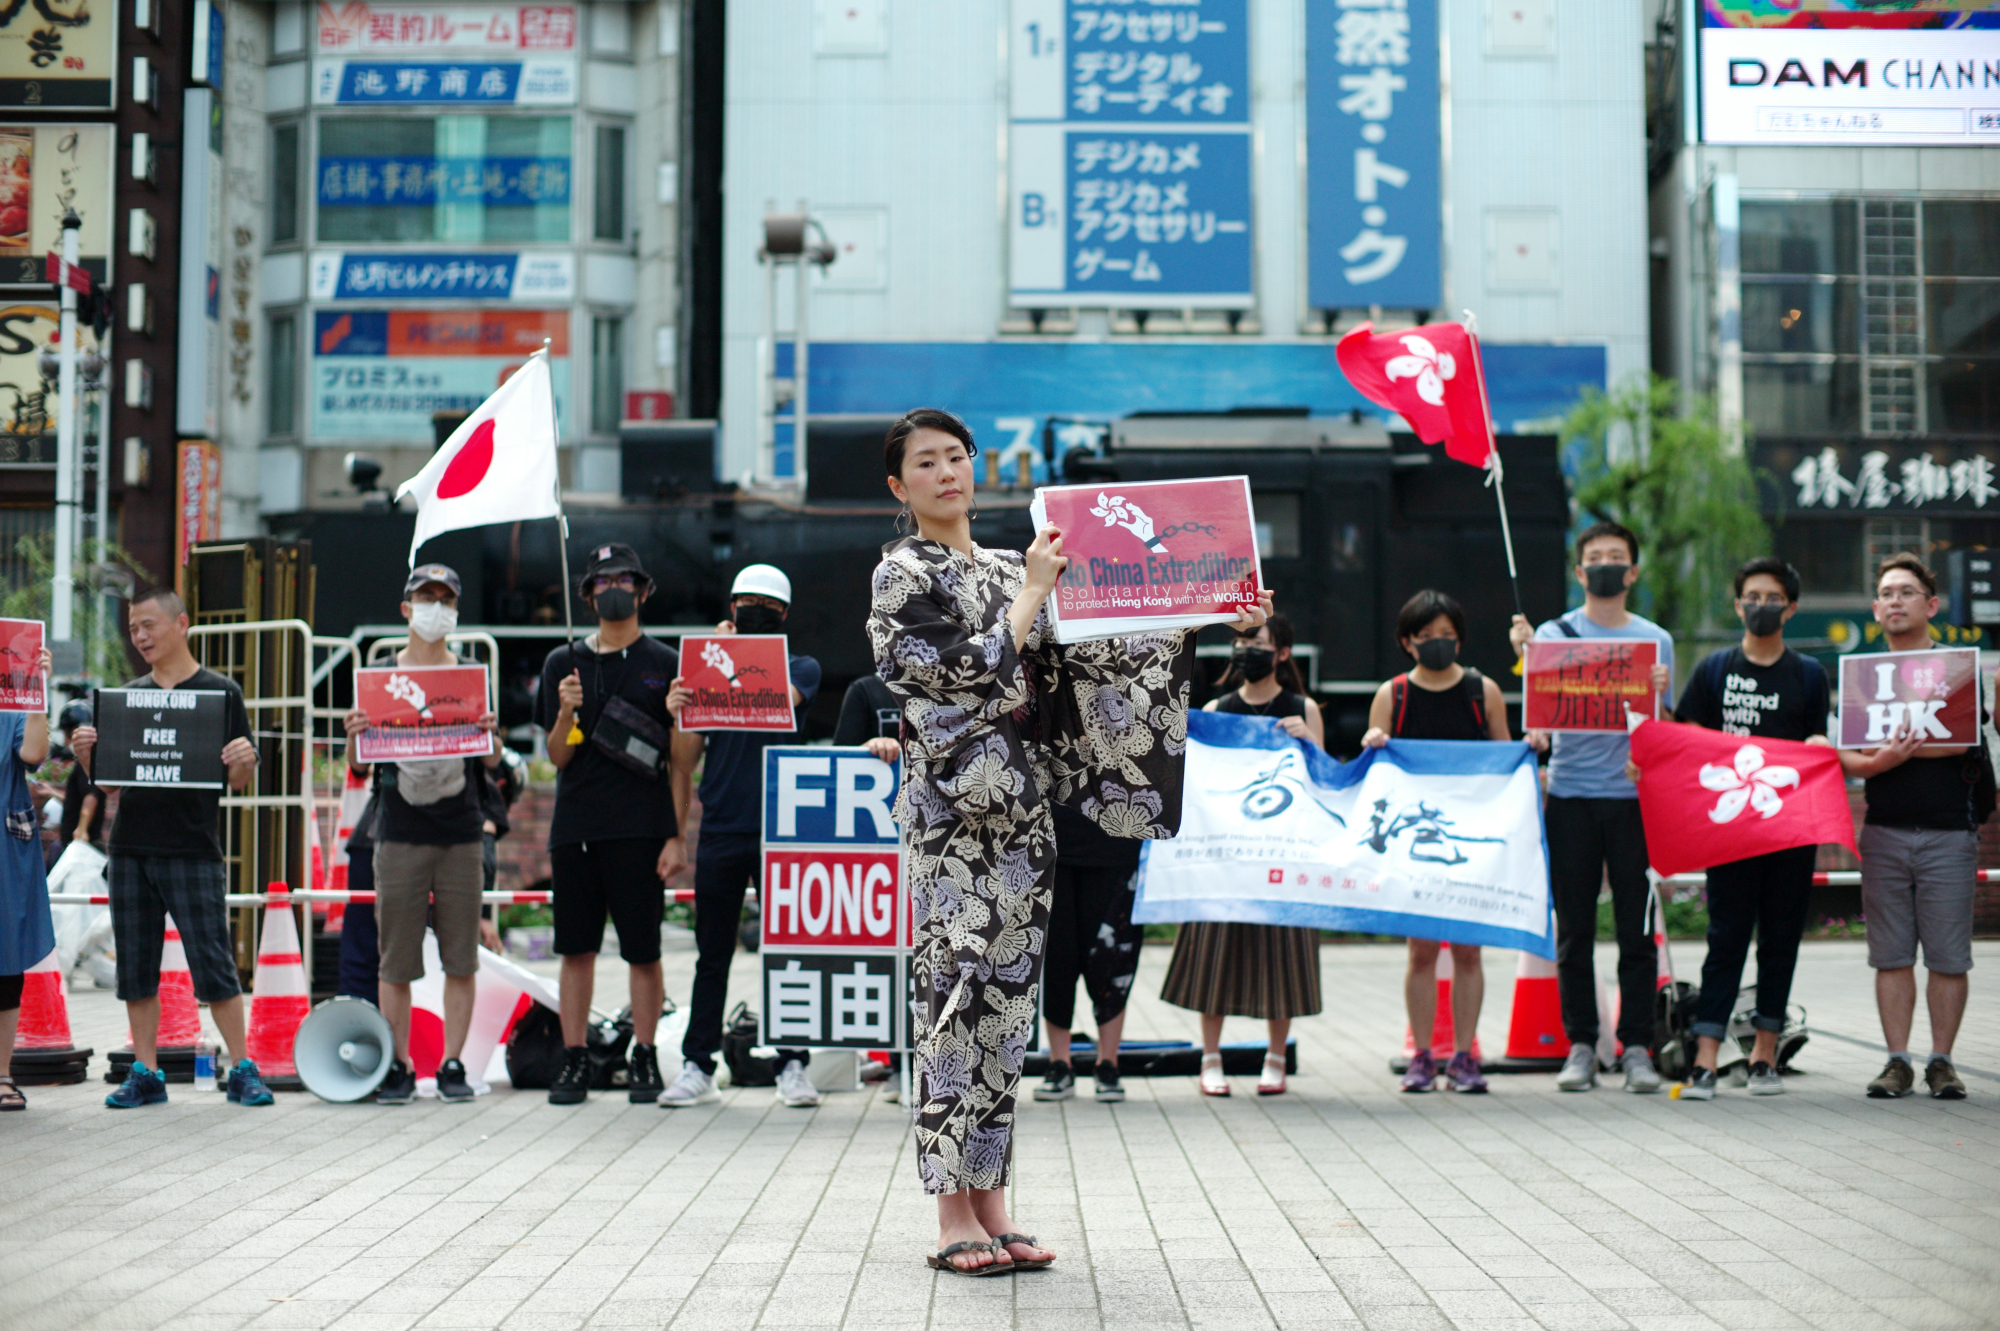 Suzuko Hirano, 25, stands in front of protesters at a demonstration she organized at Tokyo's Shinbashi Station in July to support protesters in Hong Kong fighting a bill that would allow Hong Kongers to be extradited to mainland China. | RYUSEI TAKAHASHI